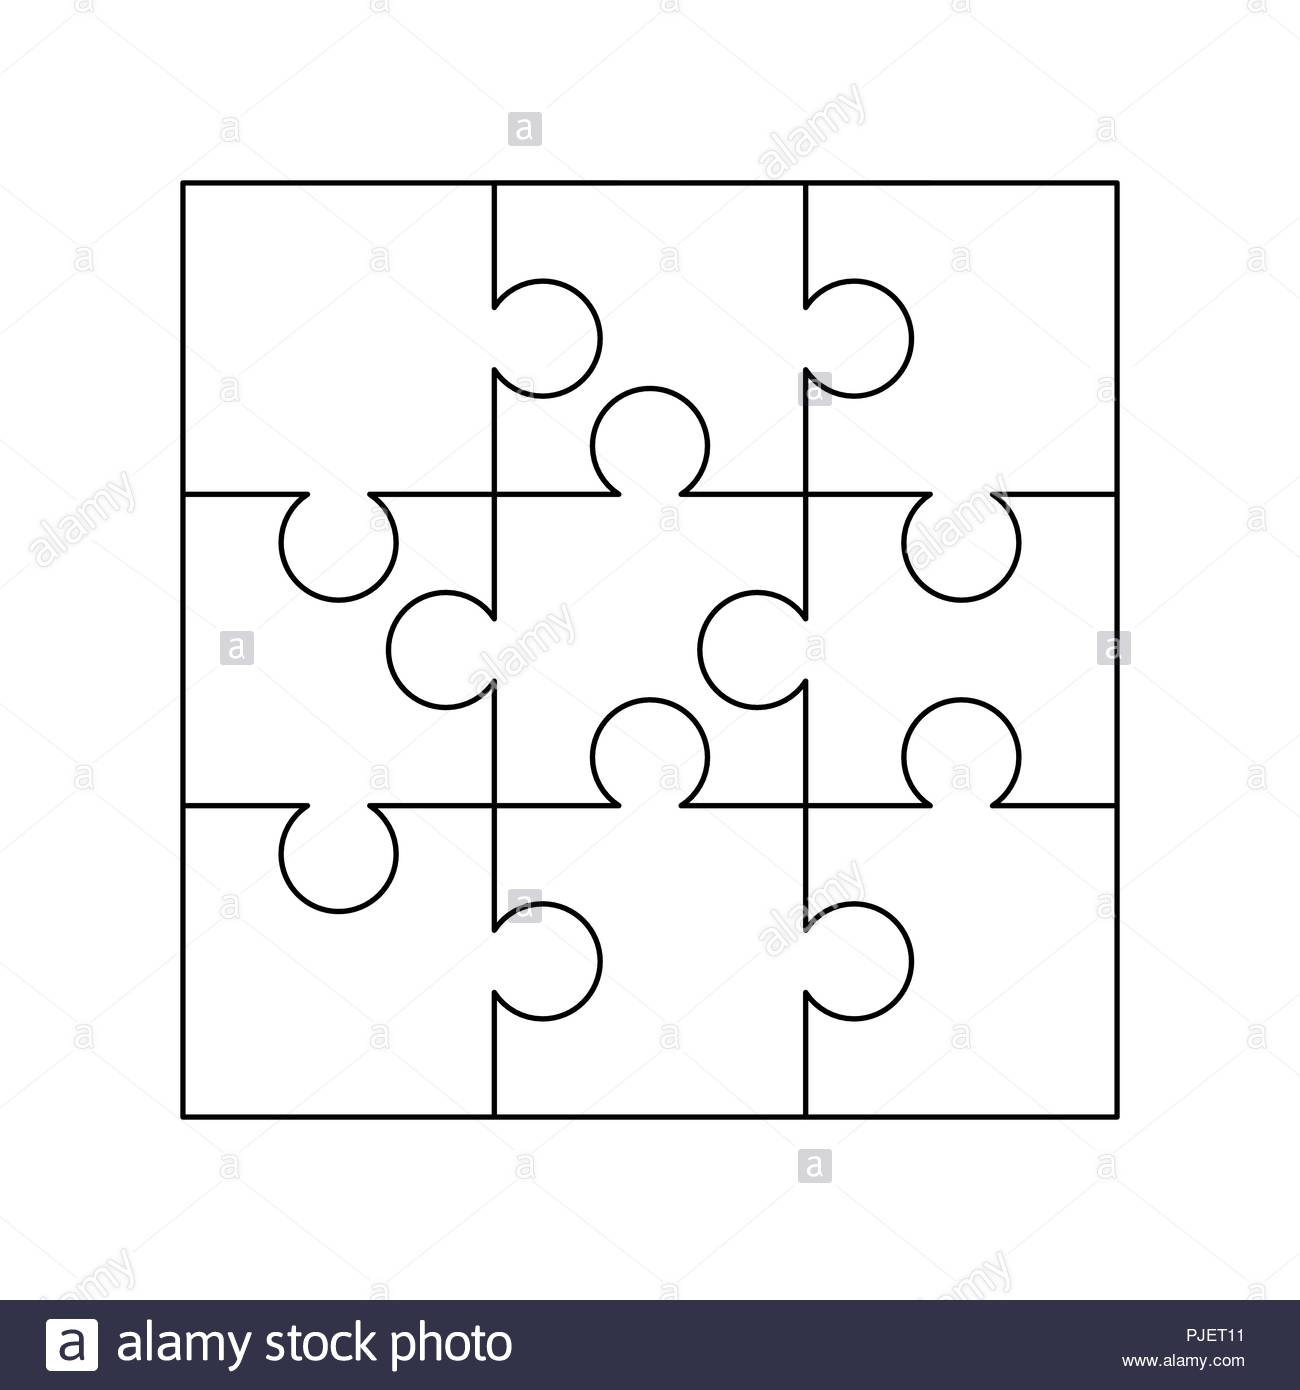 9 White Puzzles Pieces Arranged In A Square. Jigsaw Puzzle Template - Print Jigsaw Puzzle